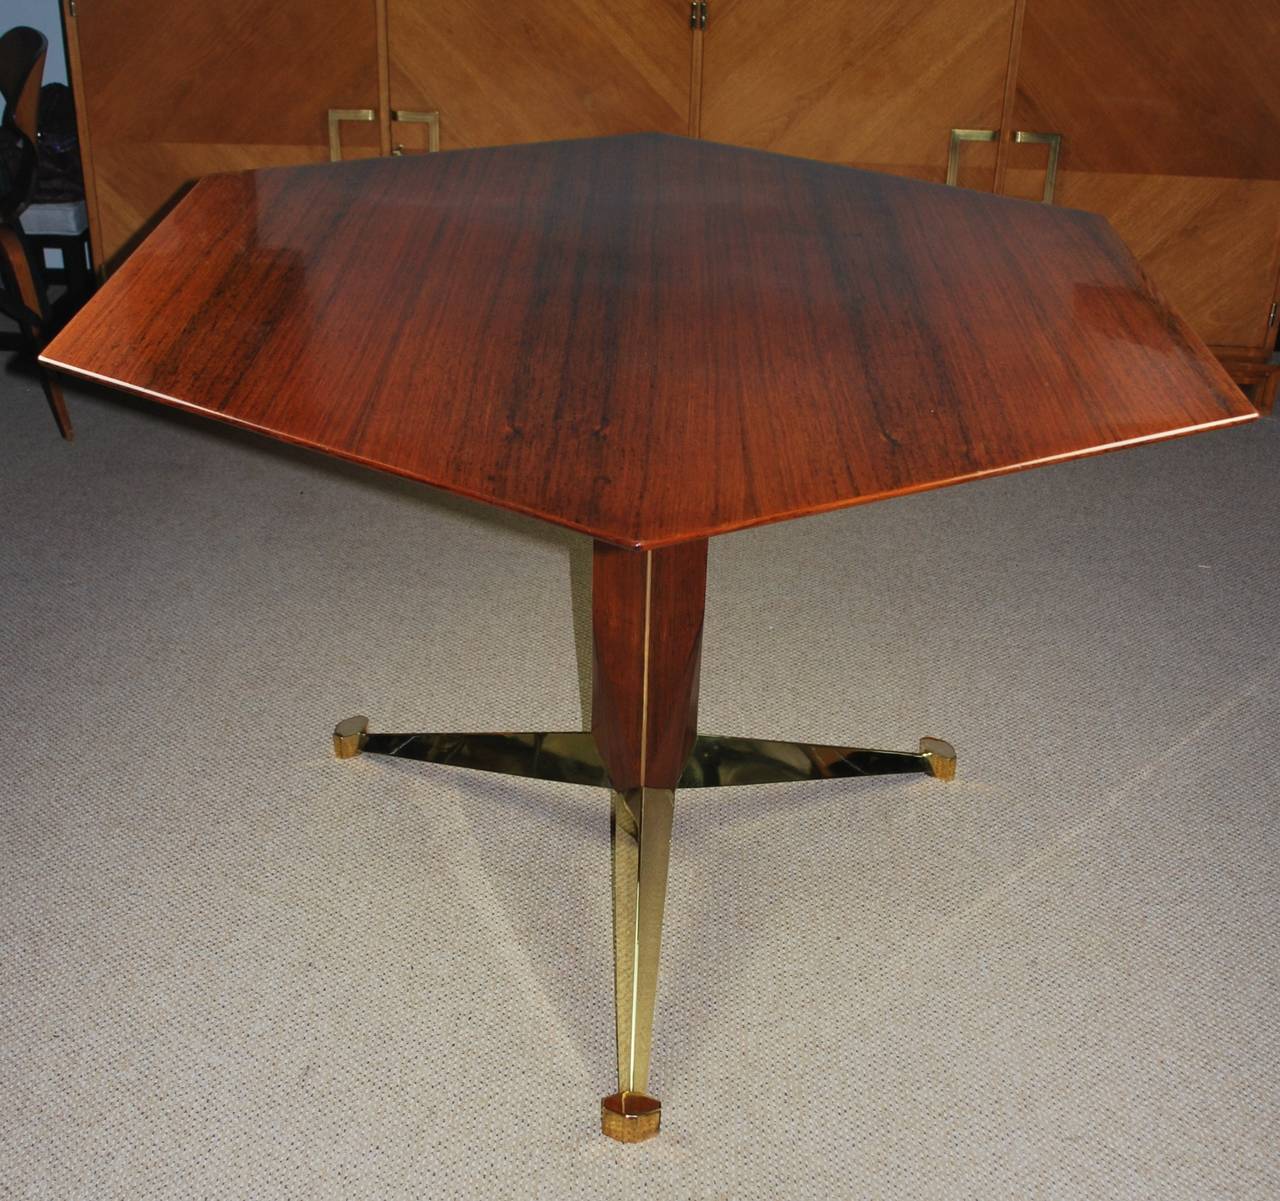 Beautiful Italian rosewood center table by Giulio Moscateli, hexagon shape with brass base and feet. Stunning grain. Excellent condition.

Please contact me to make sure item is available to view in gallery.